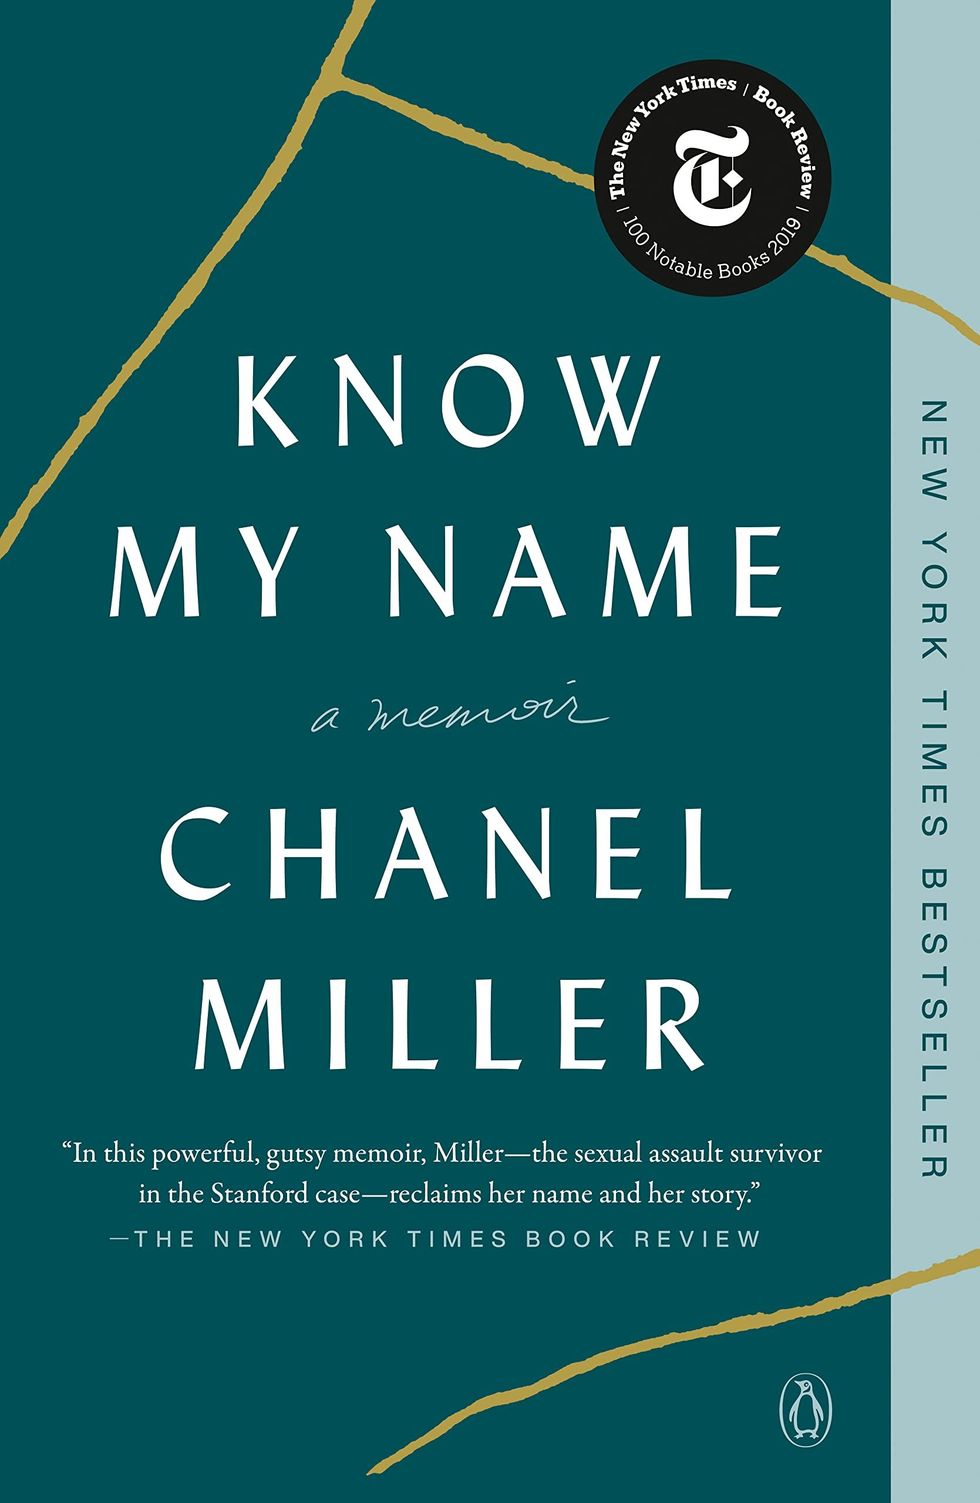 Know My Name by Chanel Miller (2019)